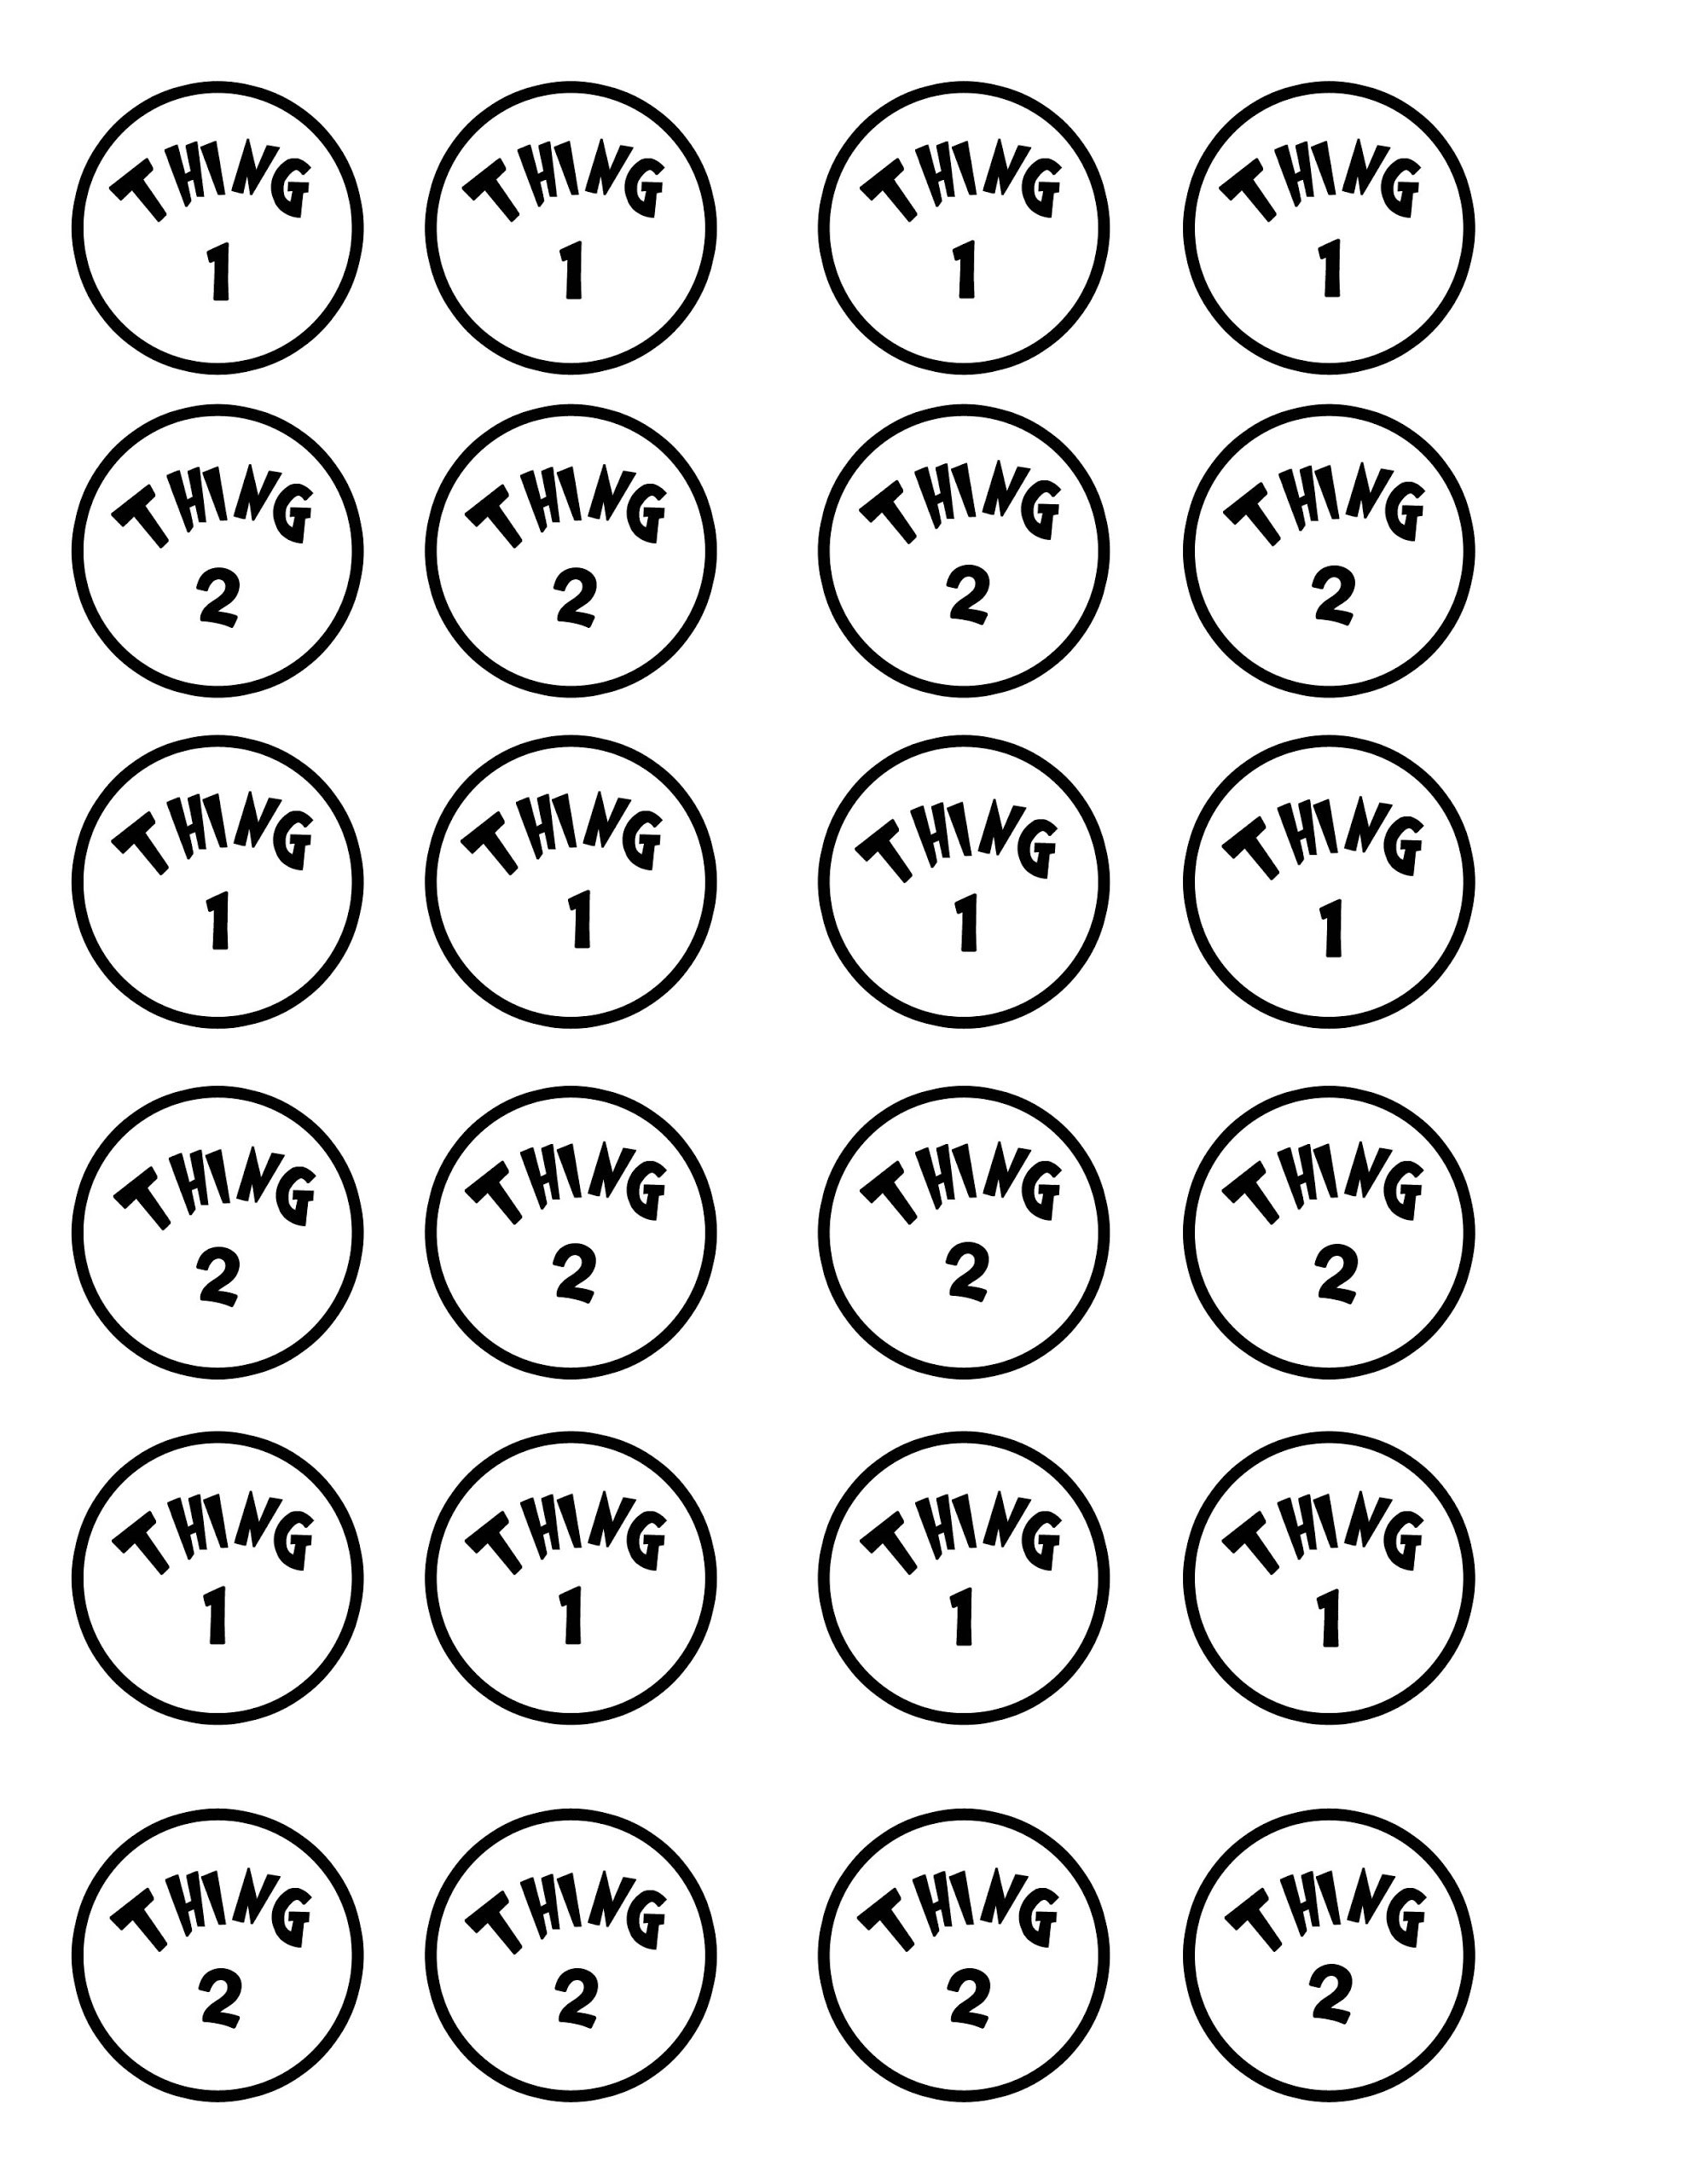 printable-thing-1-and-thing-2-face-template-get-your-hands-on-amazing